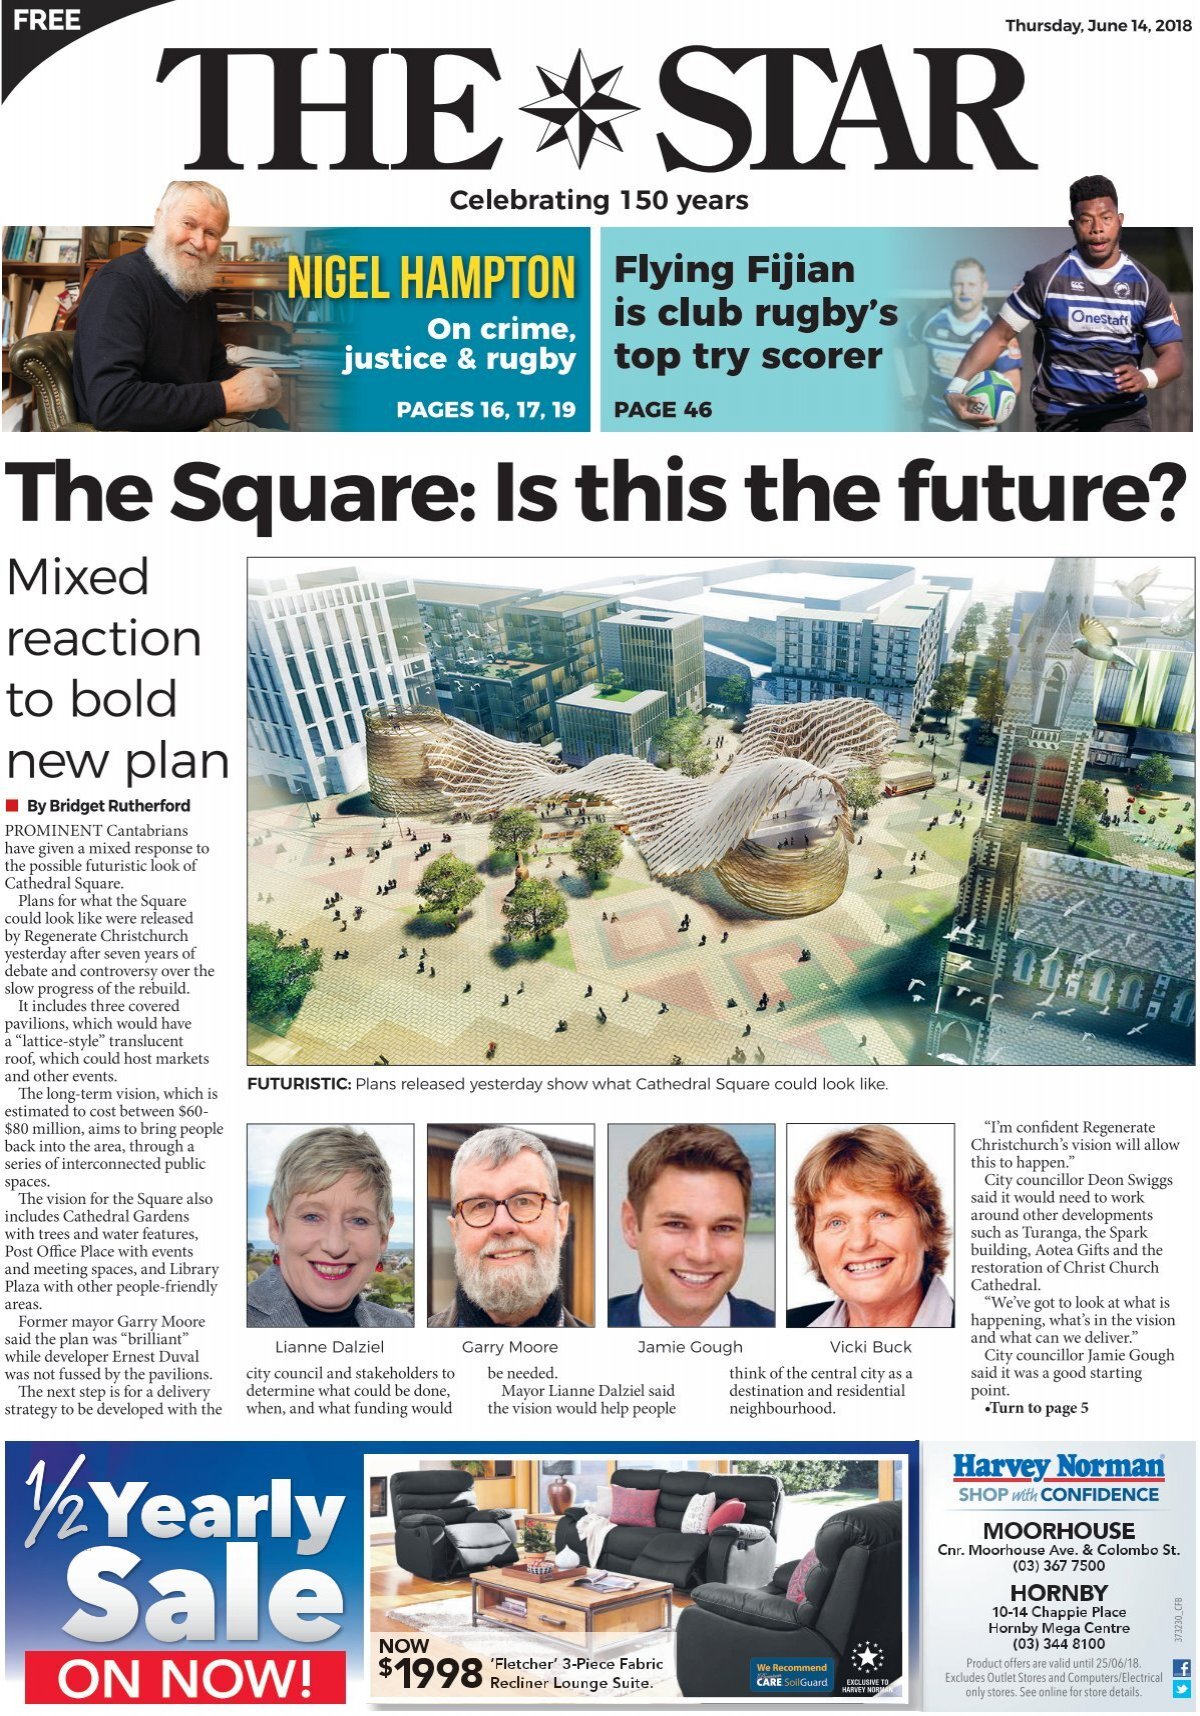 The Star: June 14, 2018